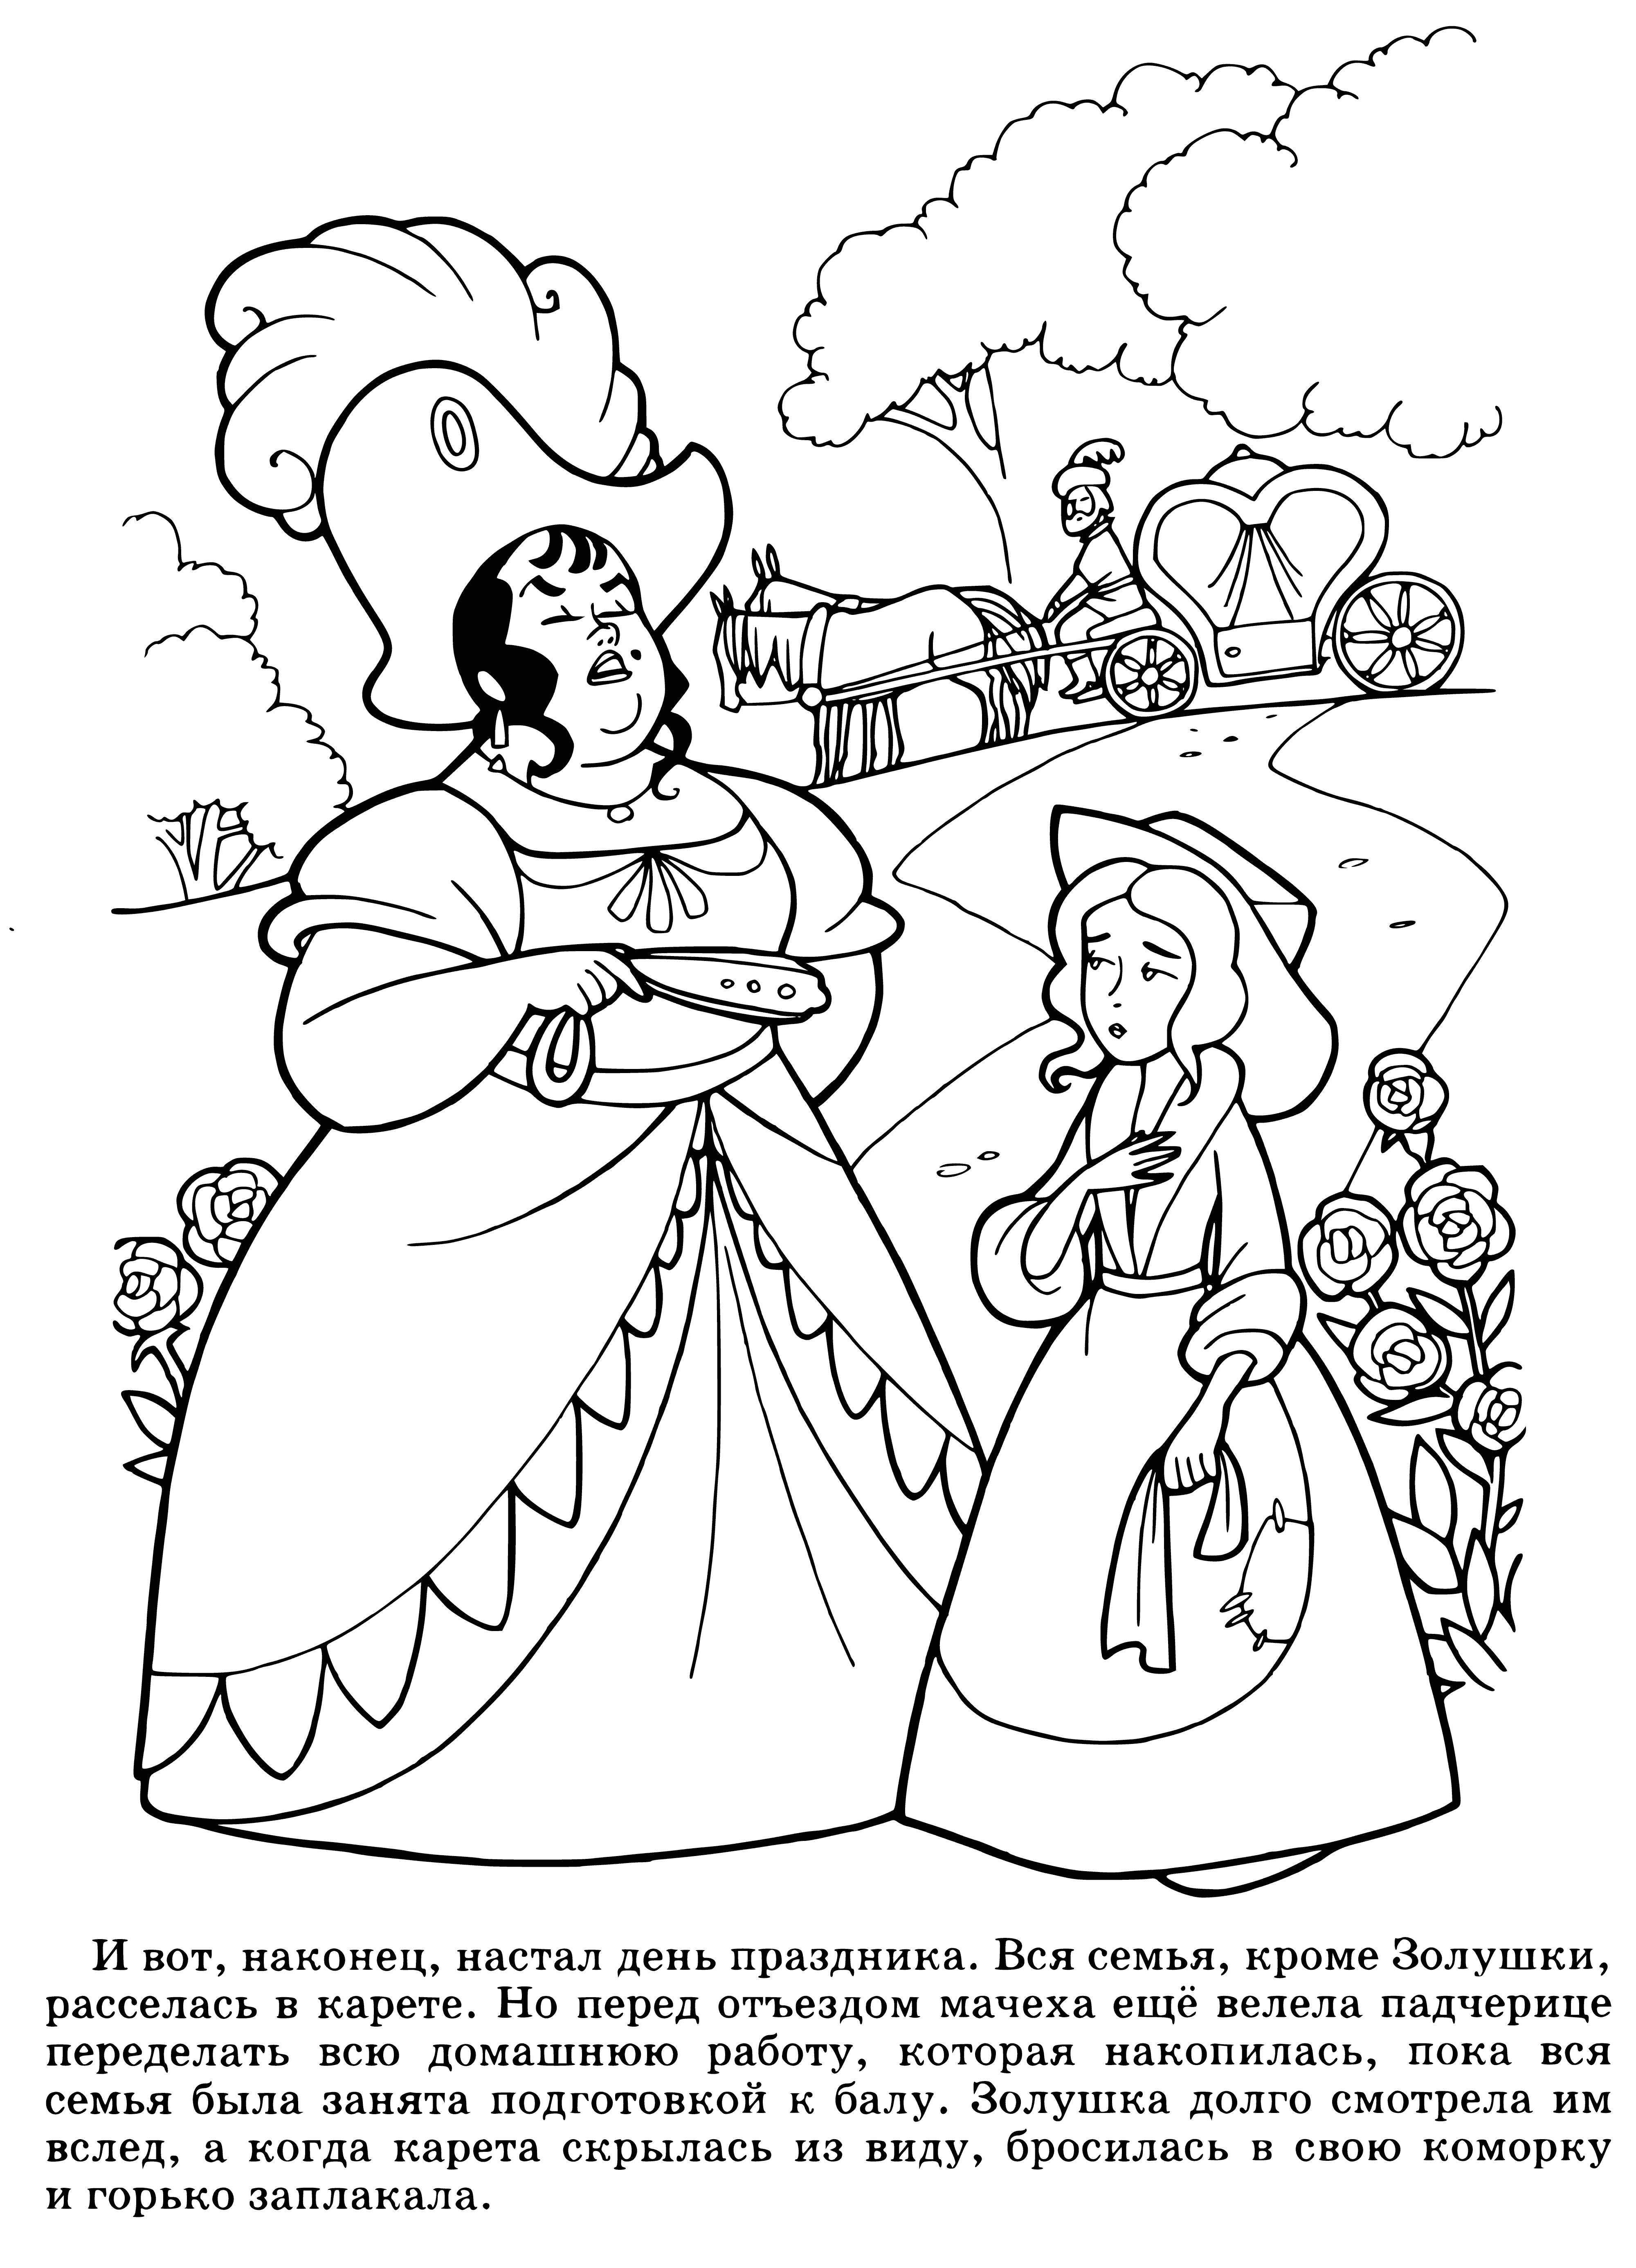 Ball today coloring page